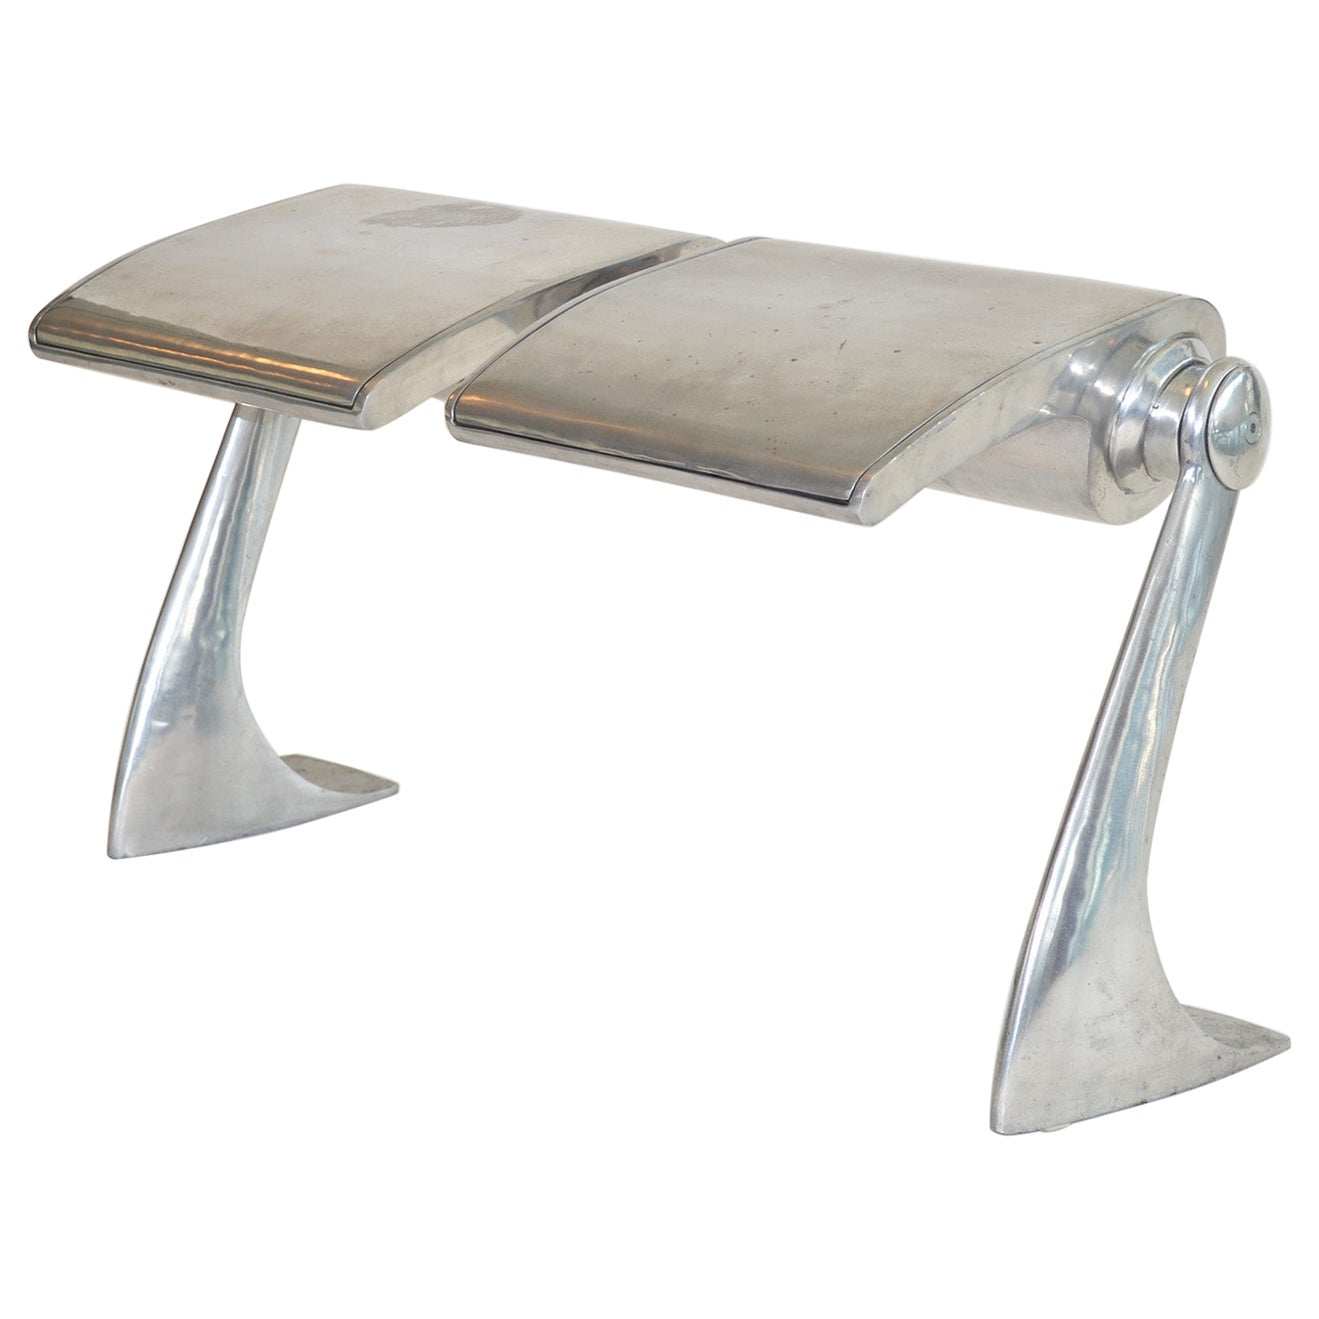 One-Off Bench Stool or Seat in Polished Aluminum Industrial Hadid Style 90s